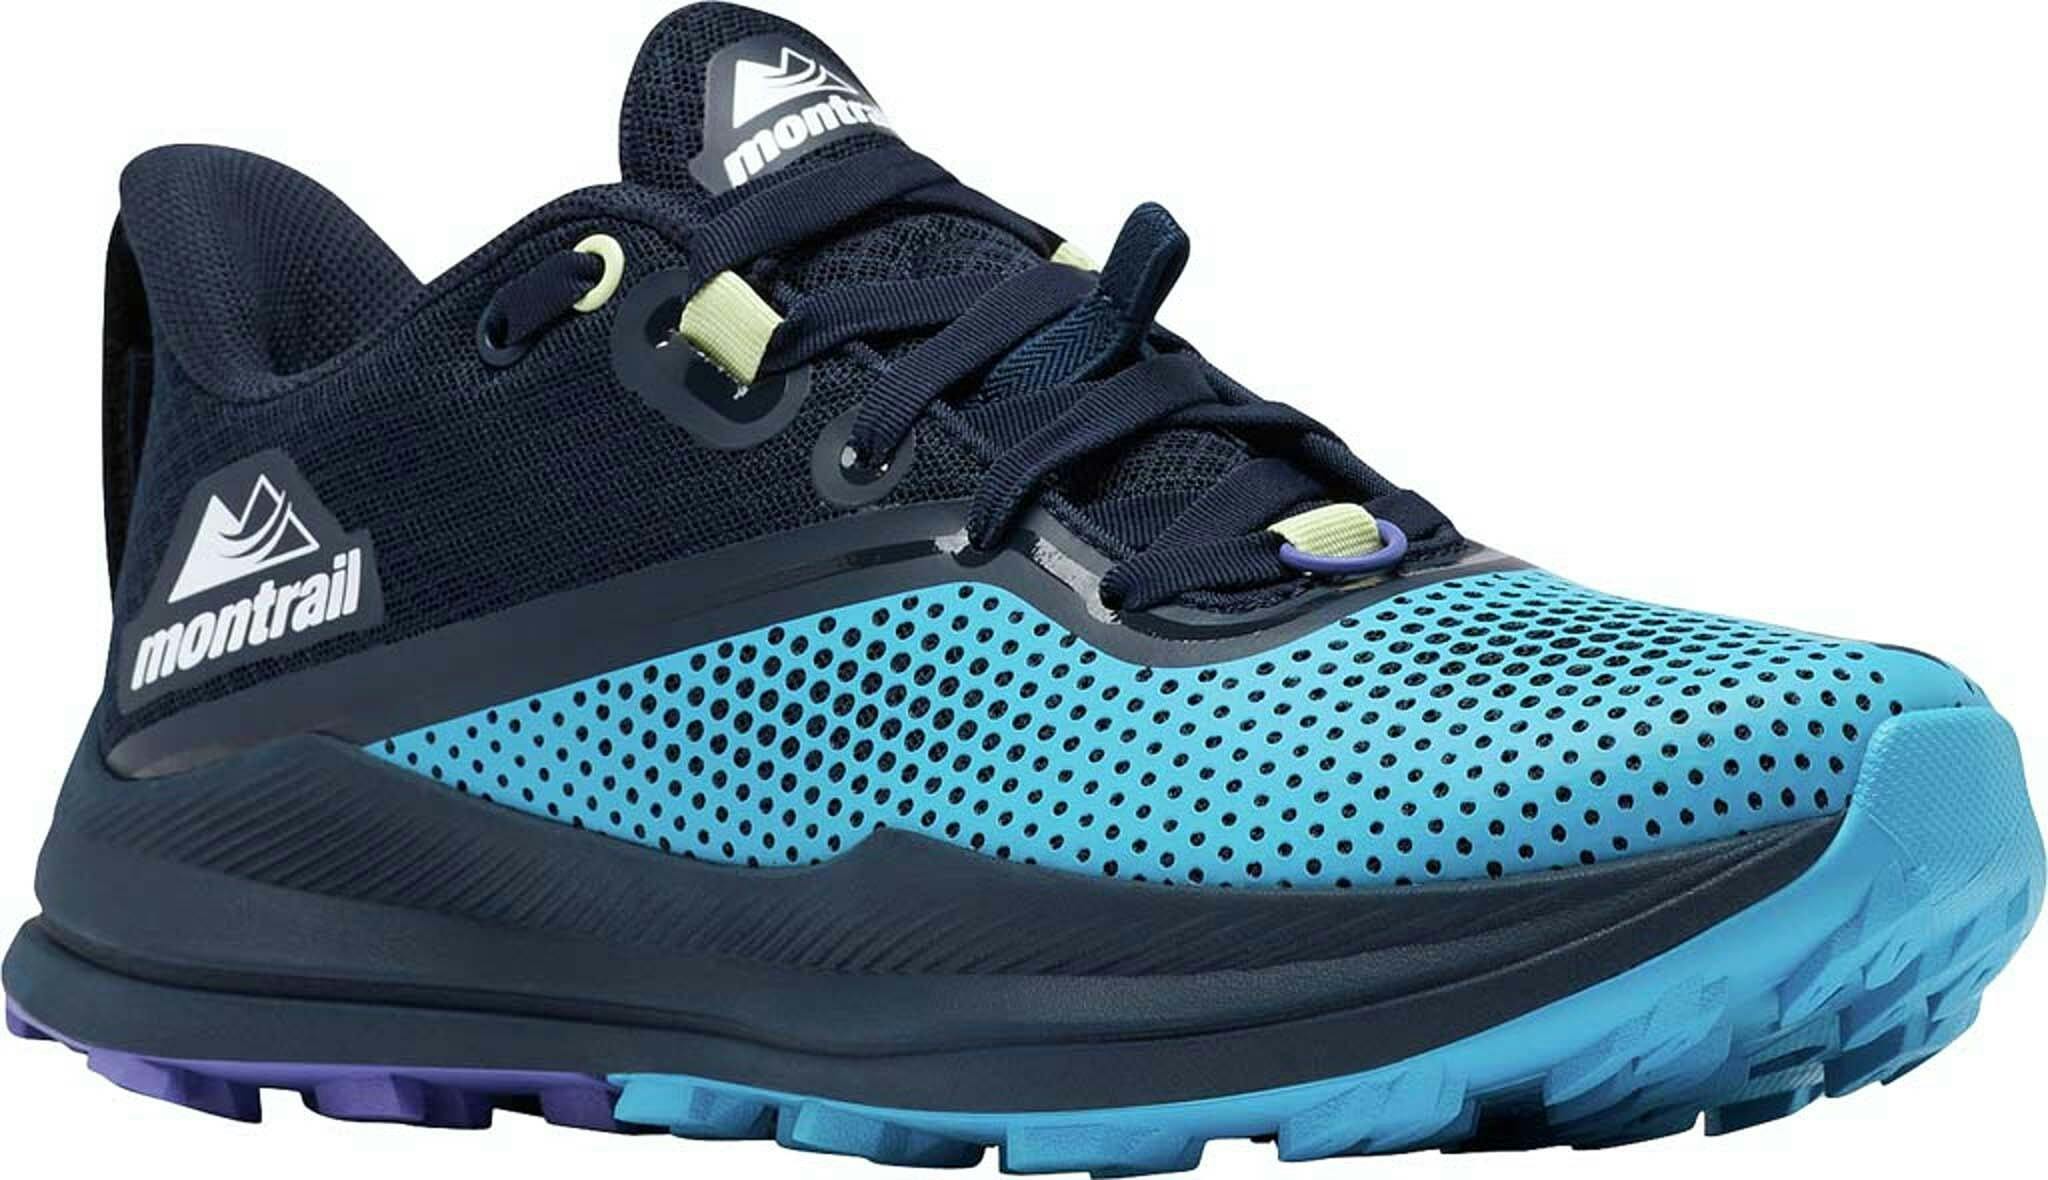 Product image for Montrail™ Trinity™ Fkt Trail Running Shoe - Women's